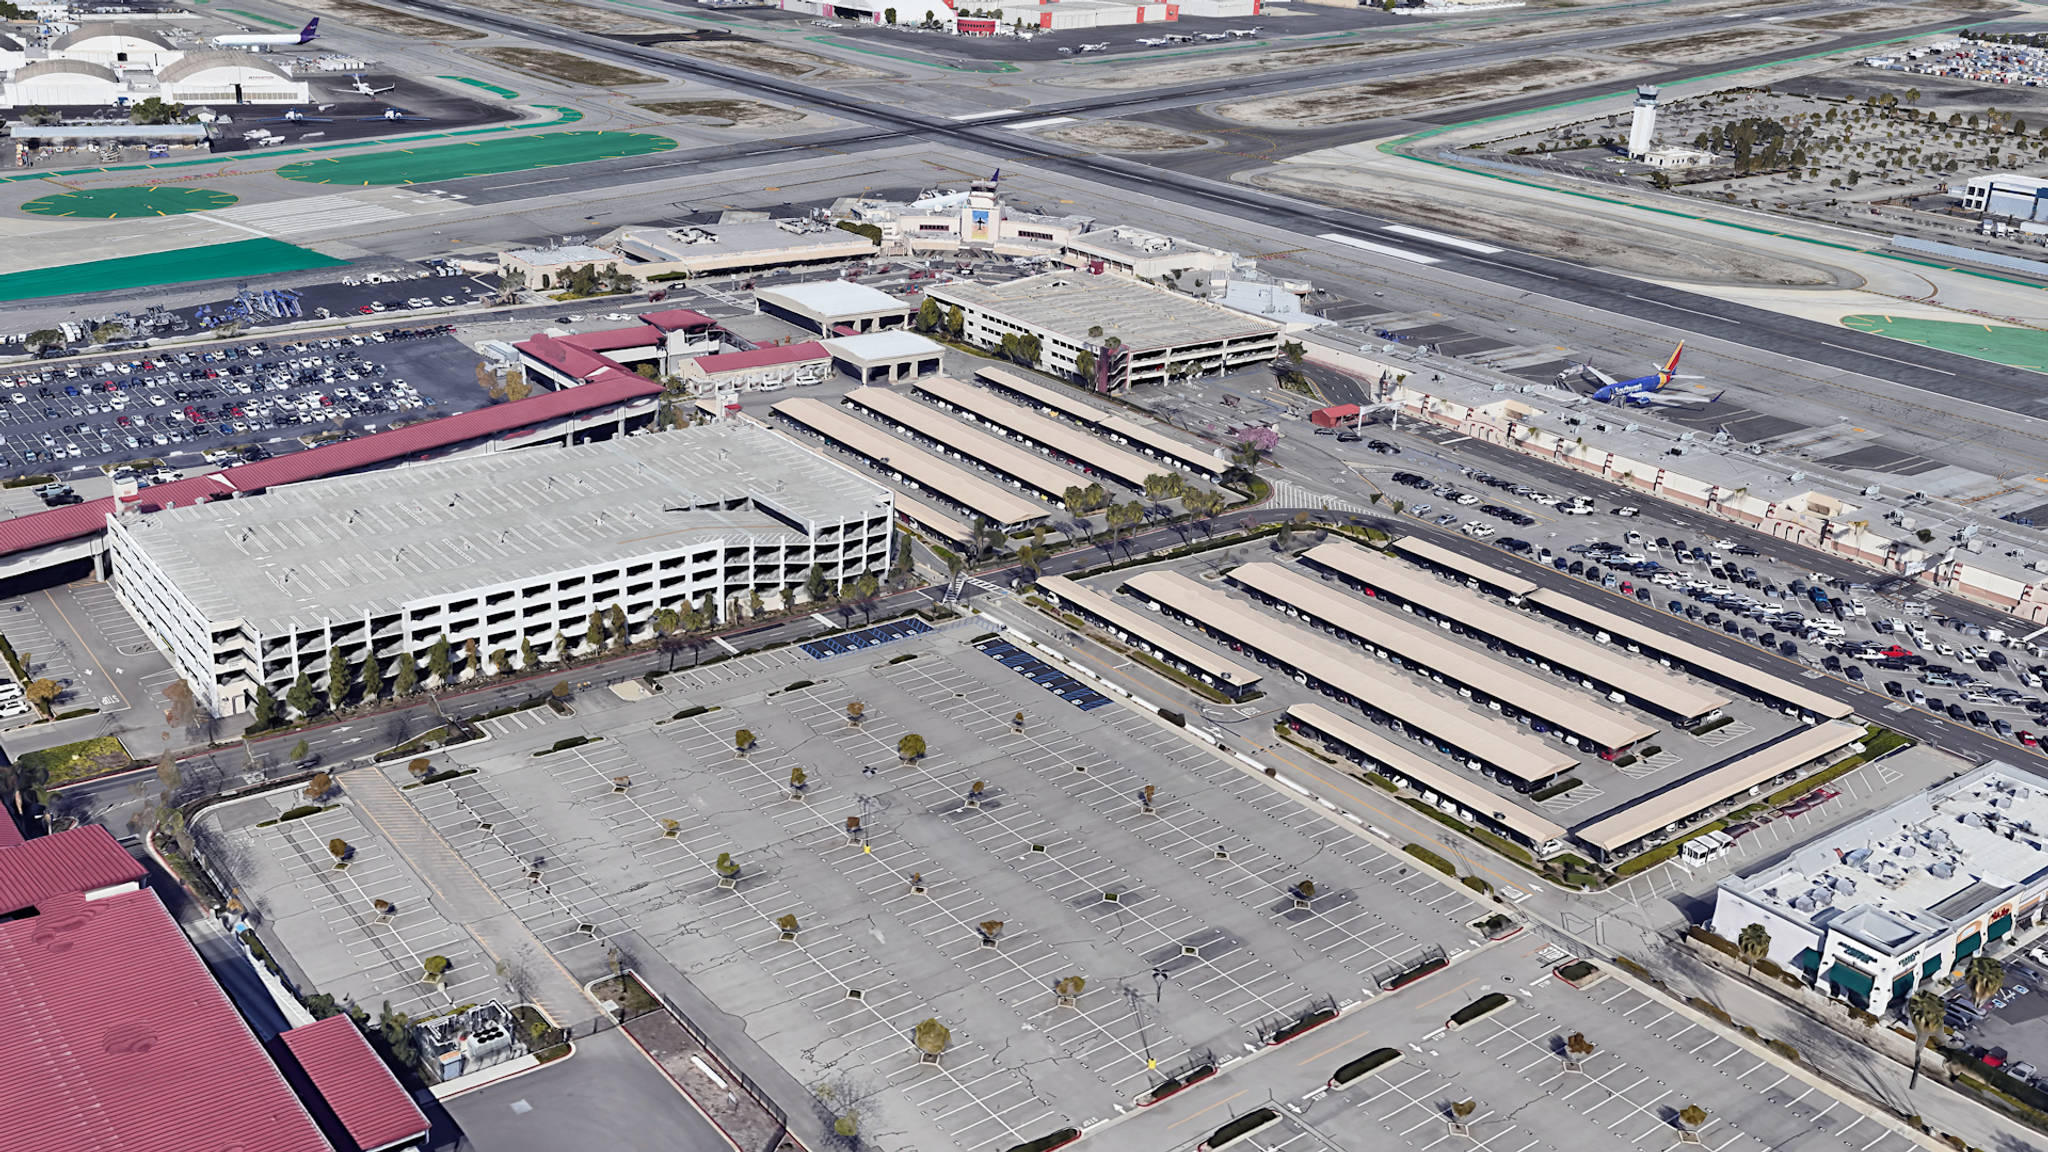 Aerial View of Burbank Airport Parking